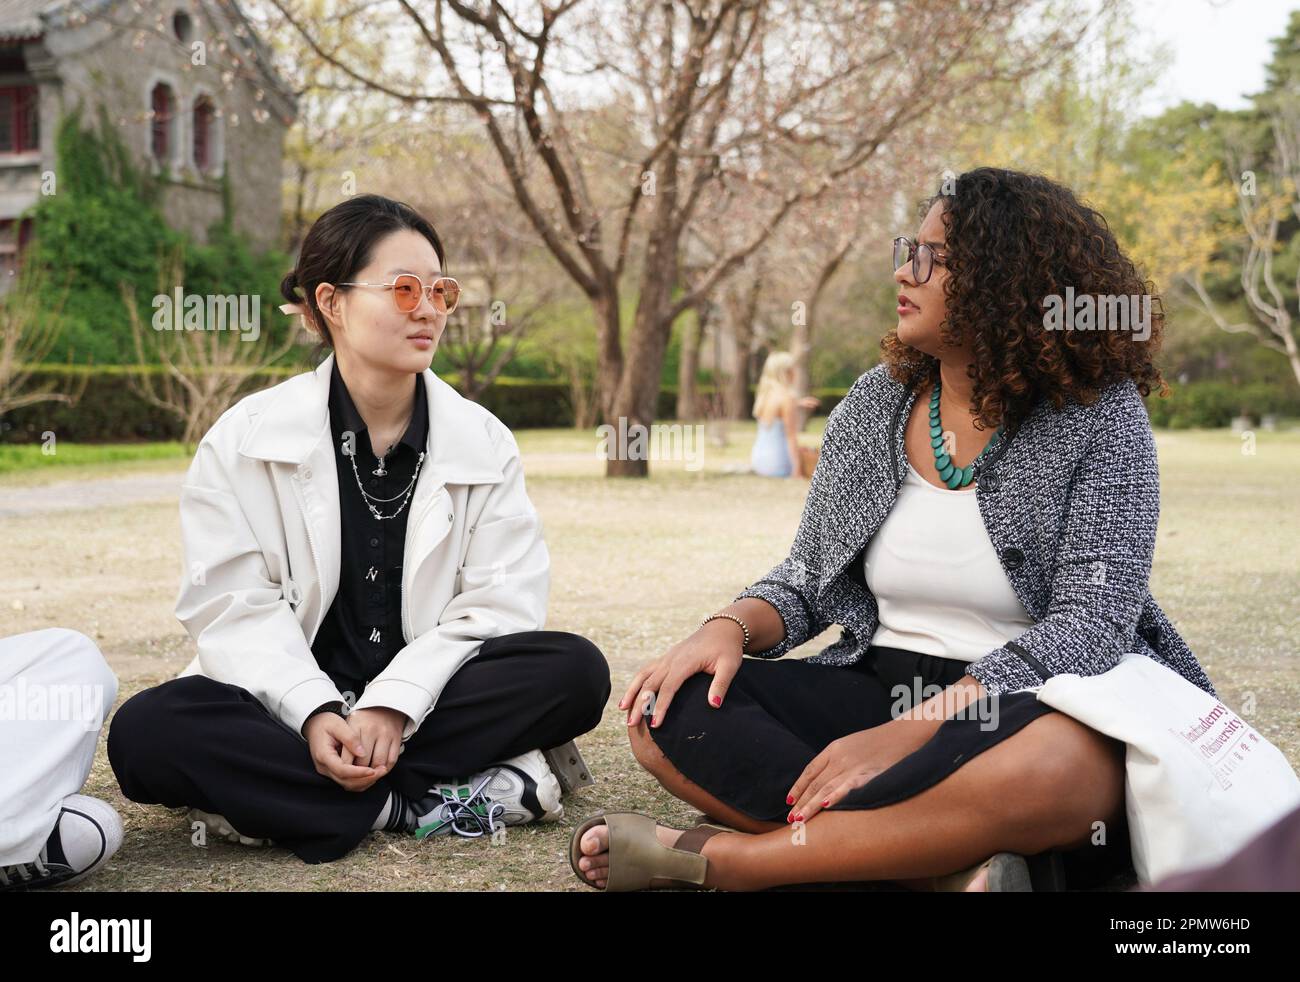 (230415) -- BEIJING, April 15, 2023 (Xinhua) -- Rafaela (R) chats with a schoolmate at Peking University in Beijing, capital of China, March 31, 2023. Maria Eduarda Variani, Rafaela Viana dos Santos, Manuela Boiteux Pestana, and Marco Andre Rocha Germano are Brazilian students studying in the Master of China Studies program at the Yenching Academy of Peking University in China. The four of them have been interested in Chinese culture since they were young. After arriving in Beijing, they have been impressed by the Chinese capital's profound cultural heritage, convenient public services, an Stock Photo